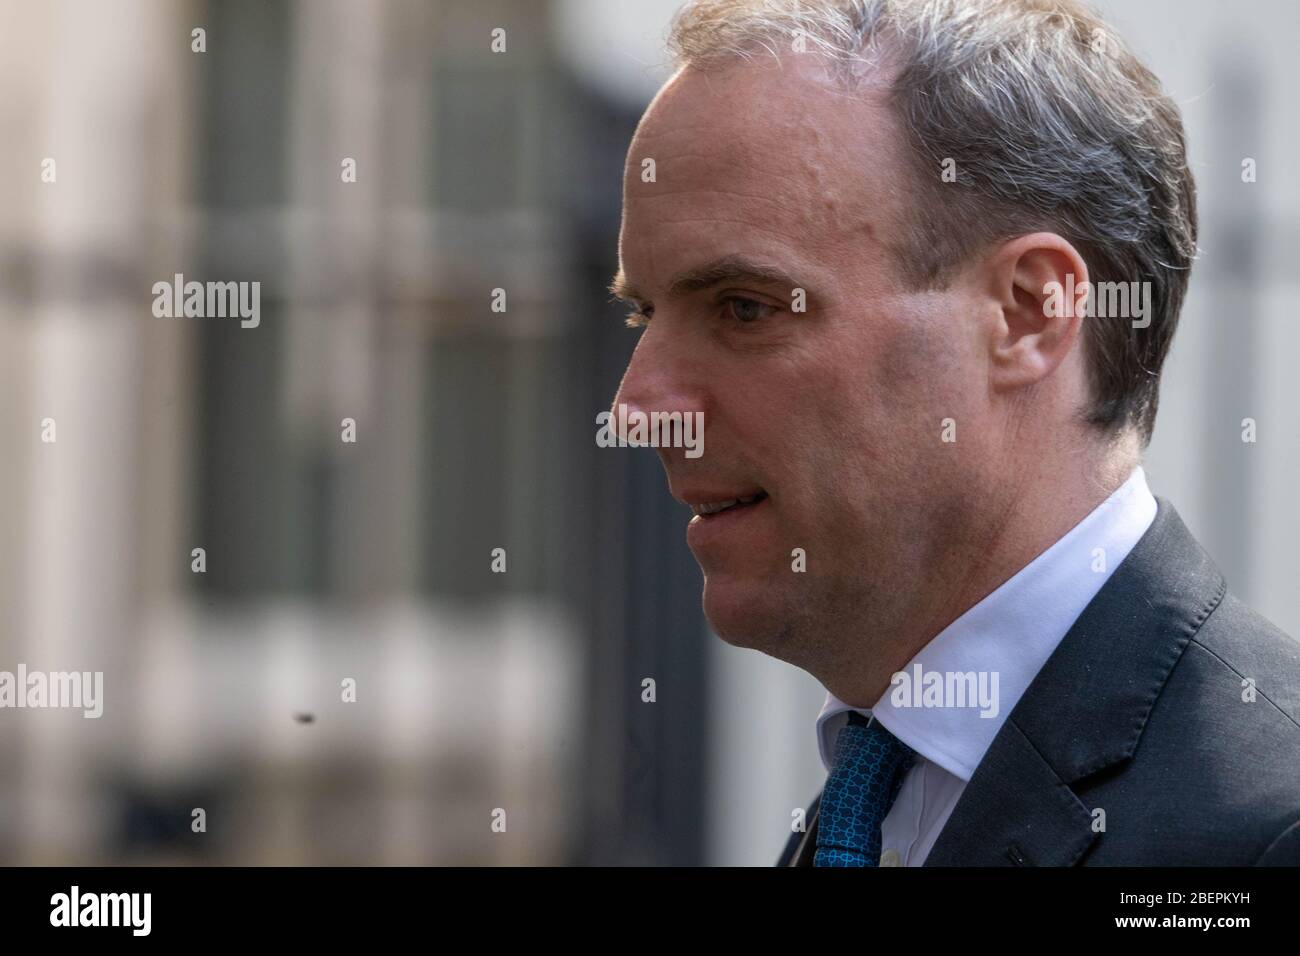 Londres, Royaume-Uni. 15 avril 2020. Dominic Raab MP PC Foreign Secretary 10 Downing Street, Londres UK Credit: Ian Davidson/Alay Live News Banque D'Images